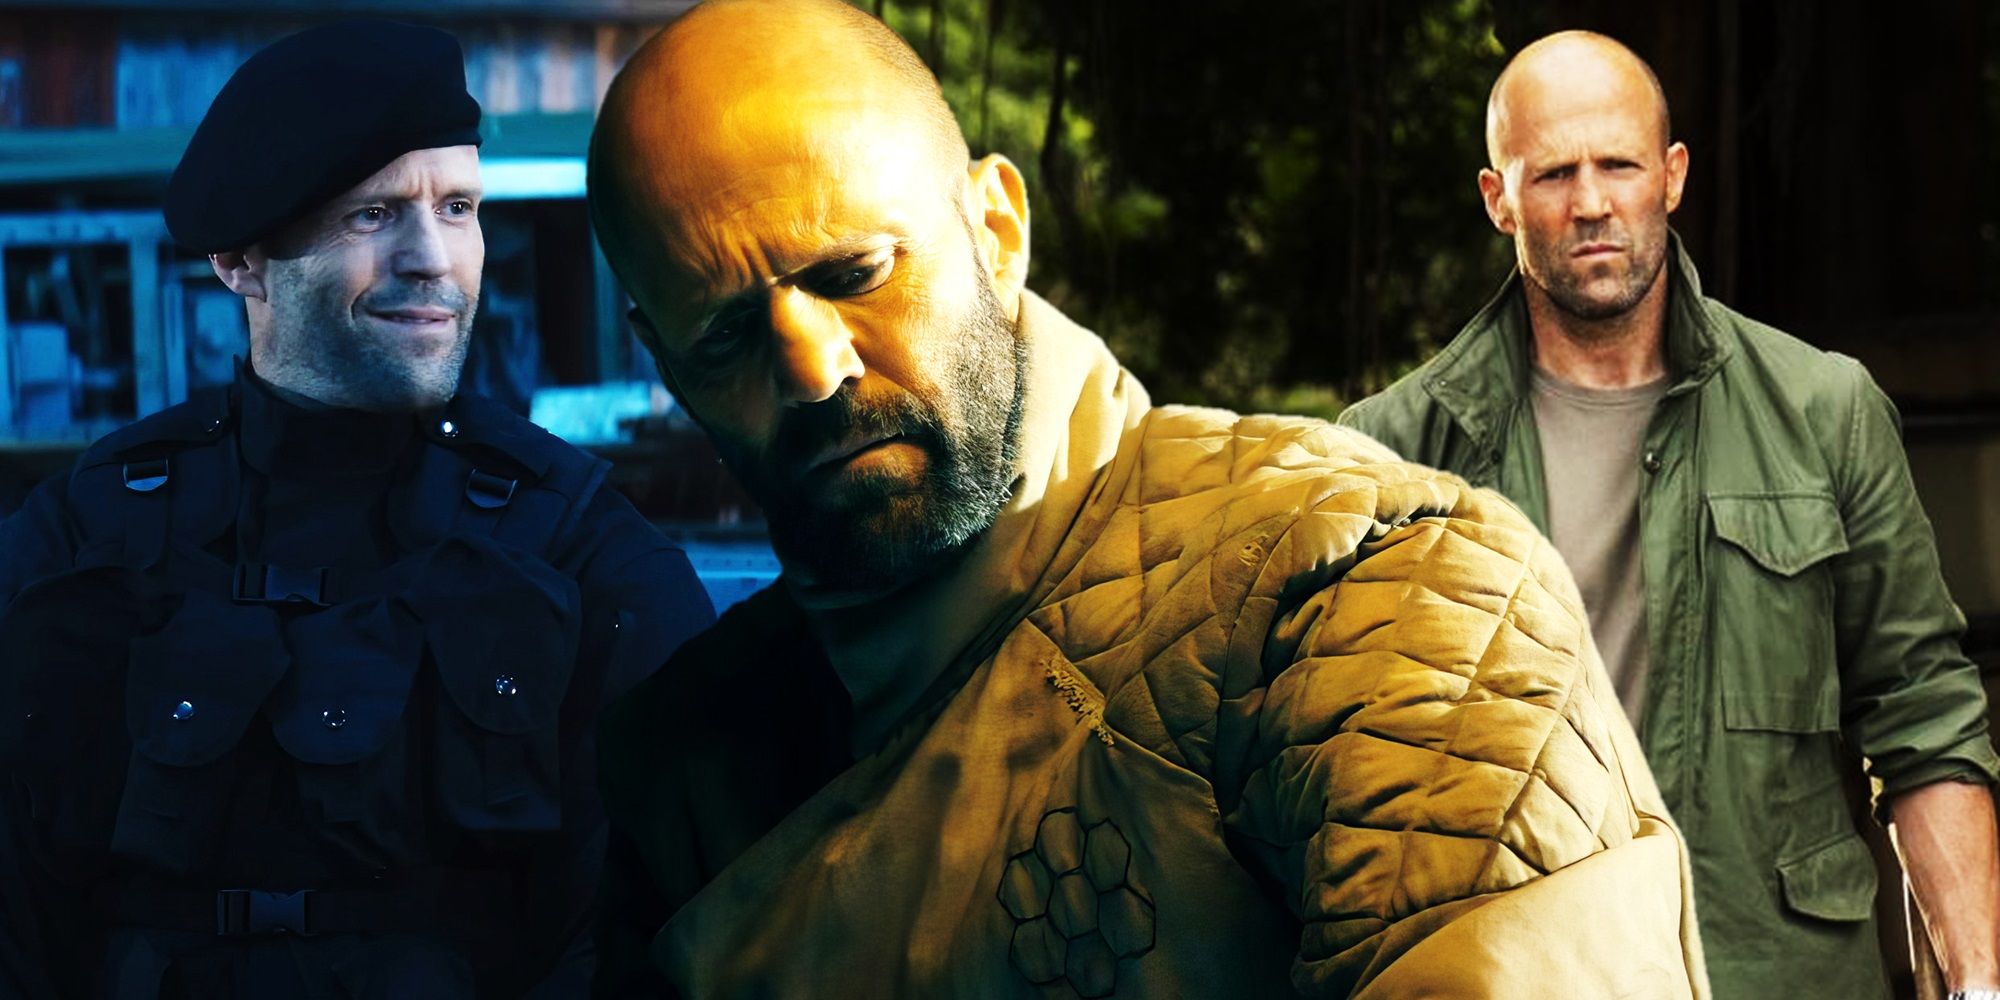 Collage of Jason Statham in The Expendables 4, The Beekeeper, and Hobbs and Shaw